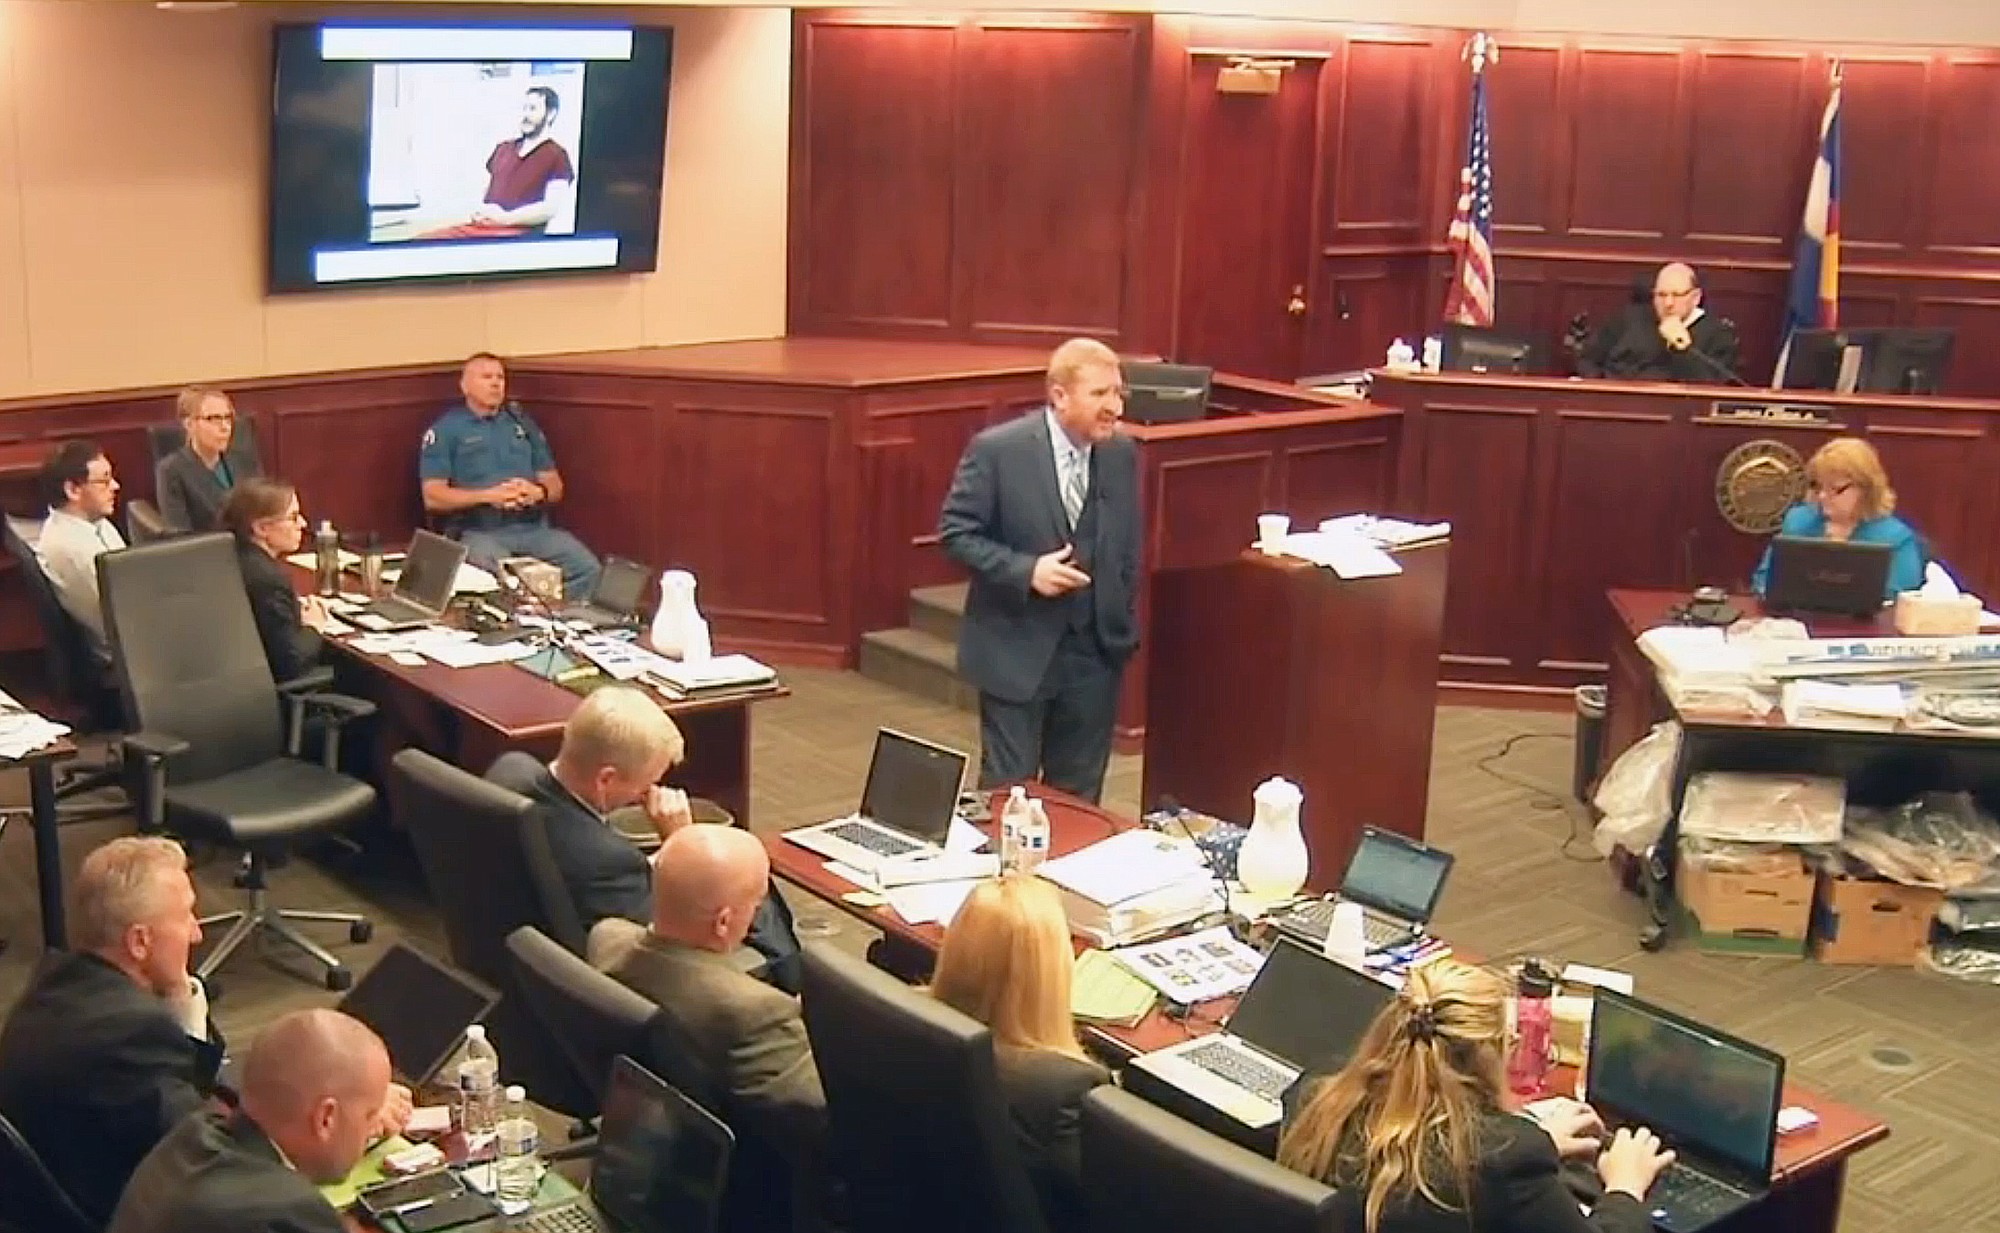 Accused Colorado theater shooter James Holmes, on the upper far left, listens to defense attorney Daniel King give closing arguments during his trial in Centennial, Colo., on Tuesday.